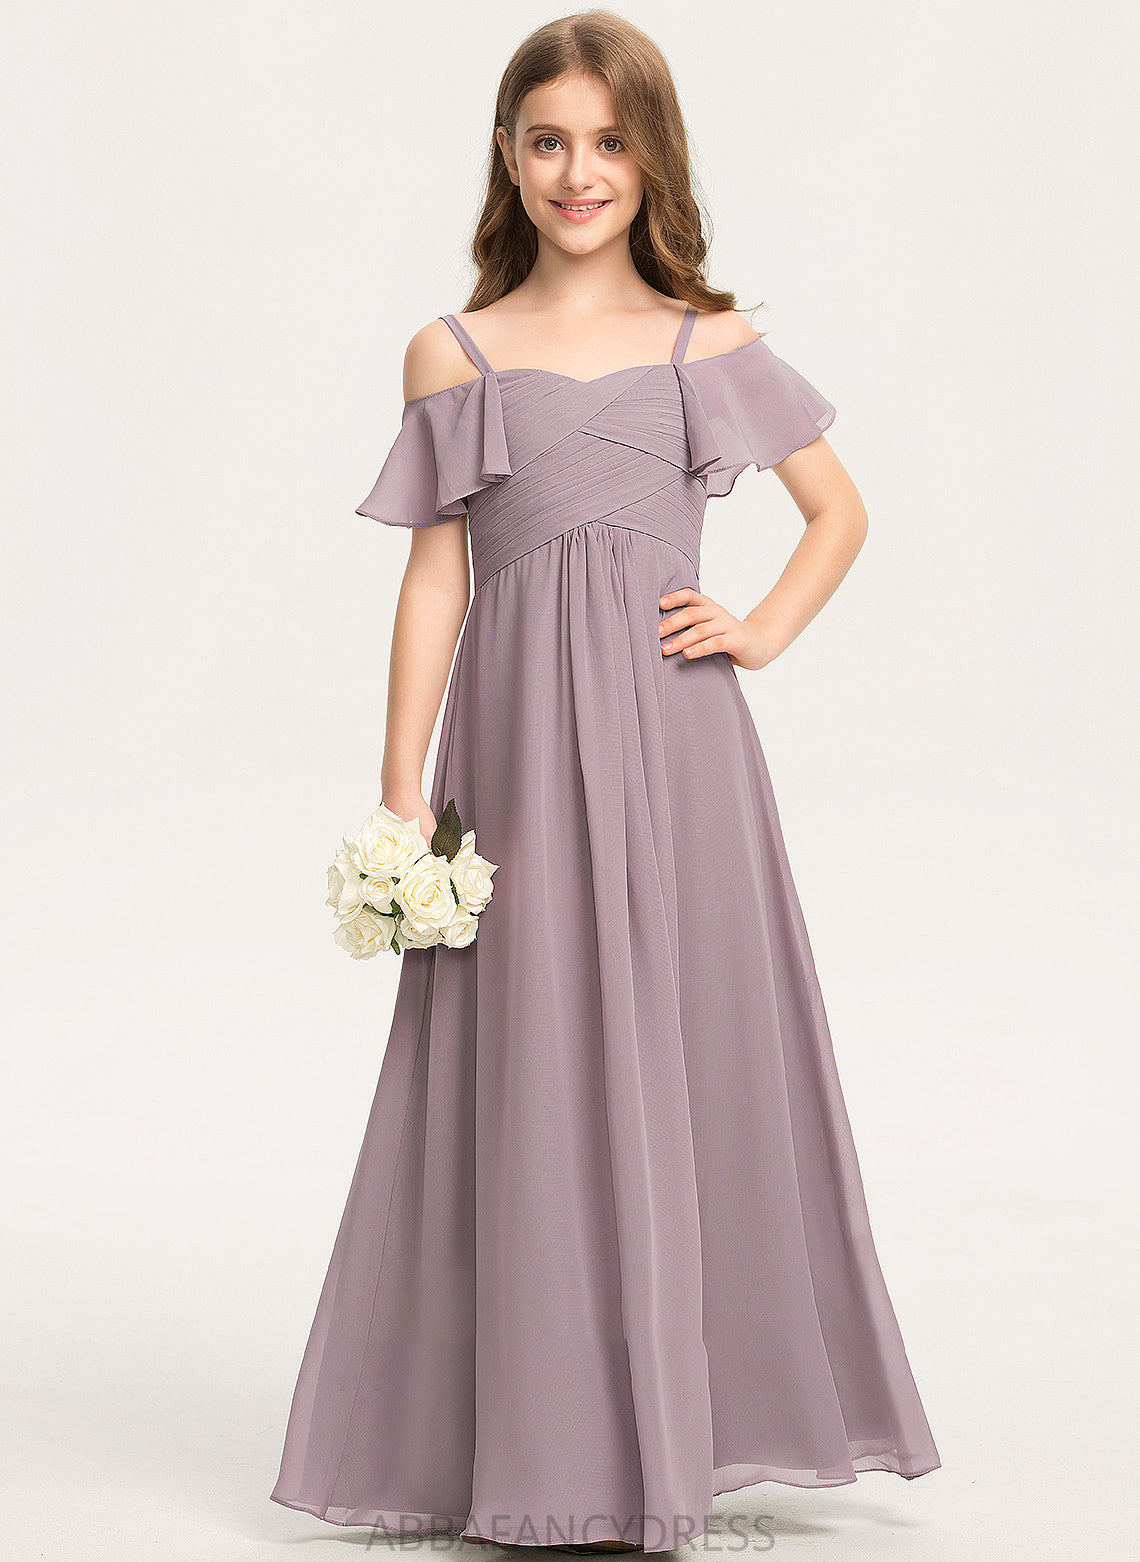 A-Line Junior Bridesmaid Dresses Chiffon Ruffle Off-the-Shoulder Aylin Floor-Length With